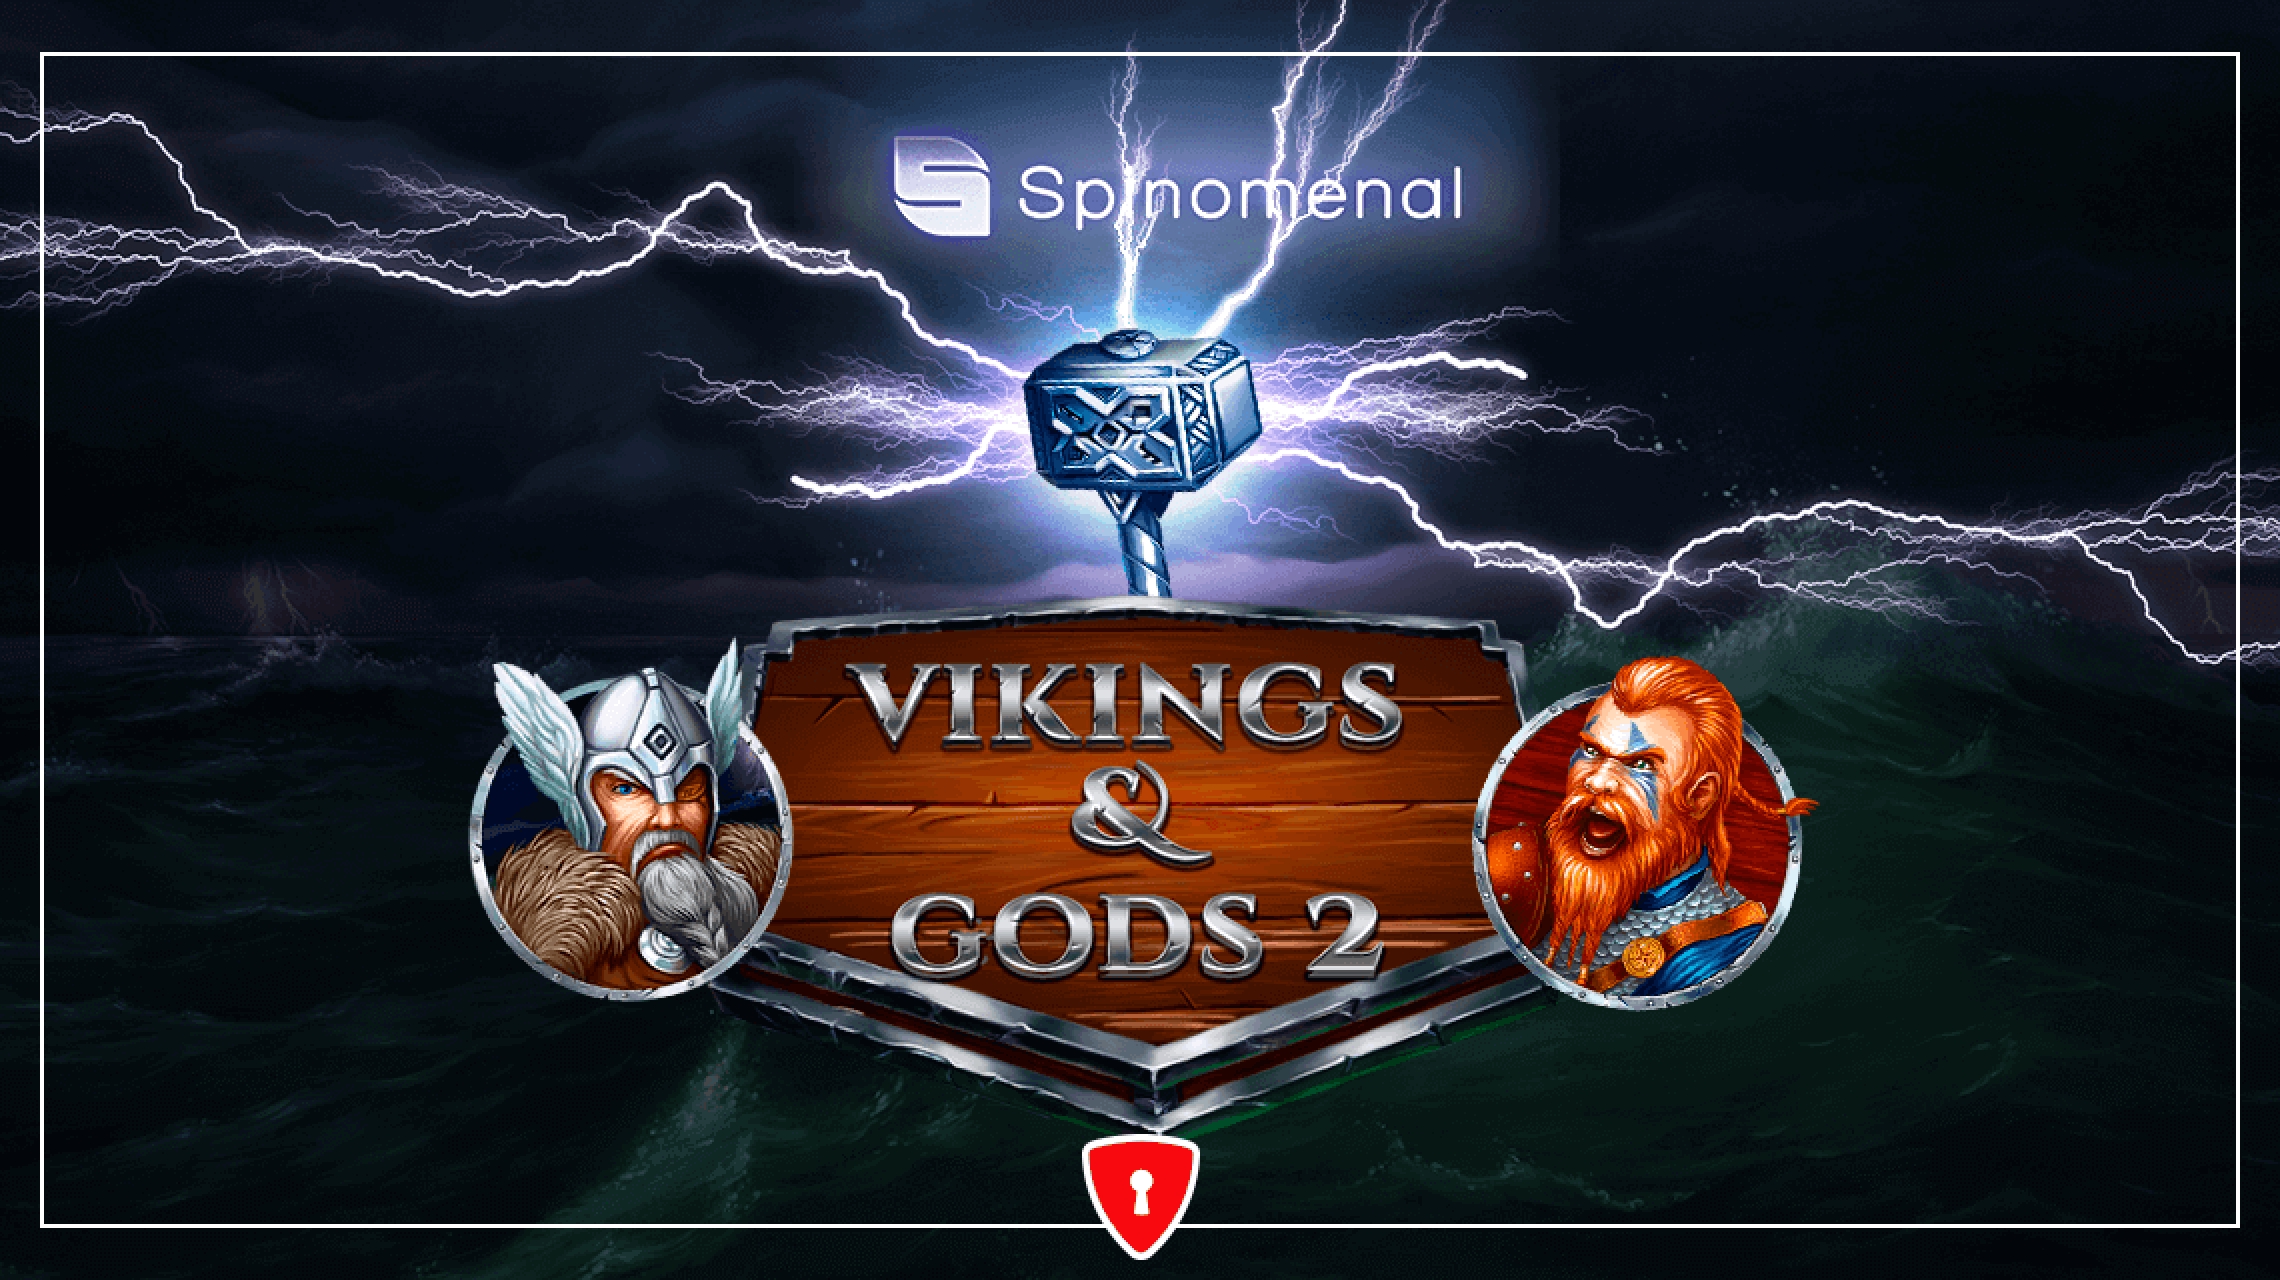 The Vikings and Gods 2 15 Lines Online Slot Demo Game by Spinomenal